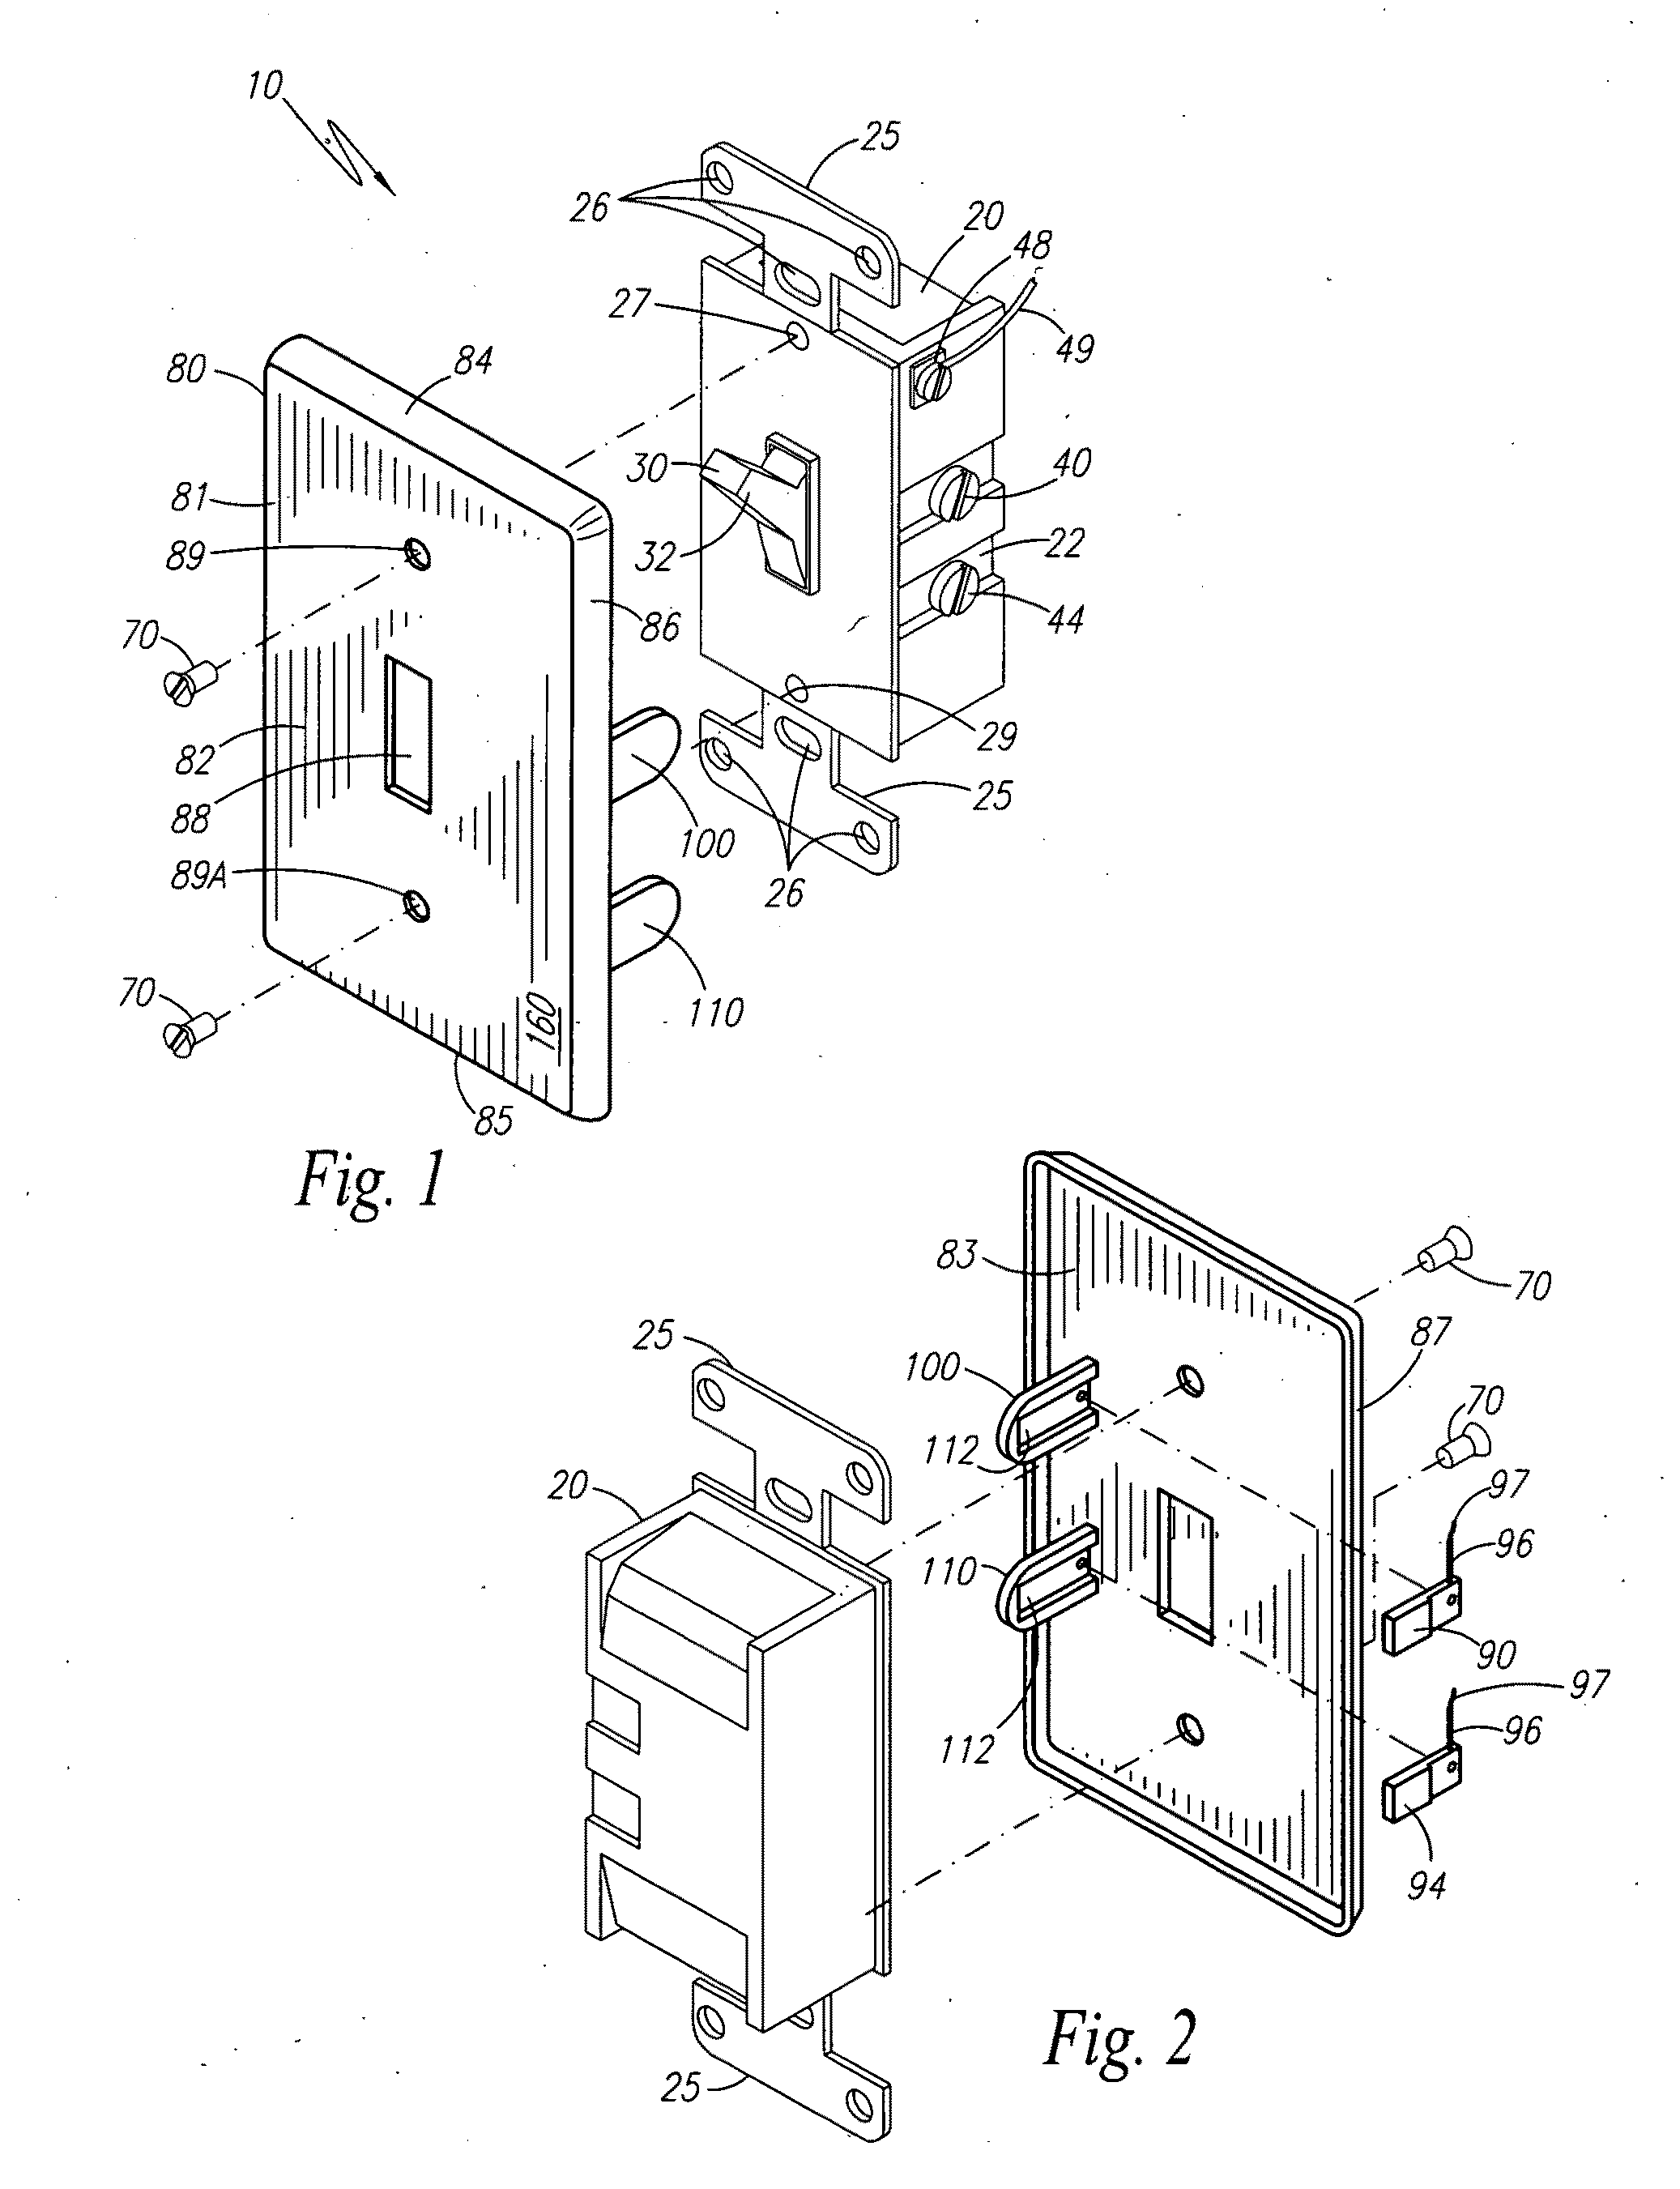 Electric function module assembly